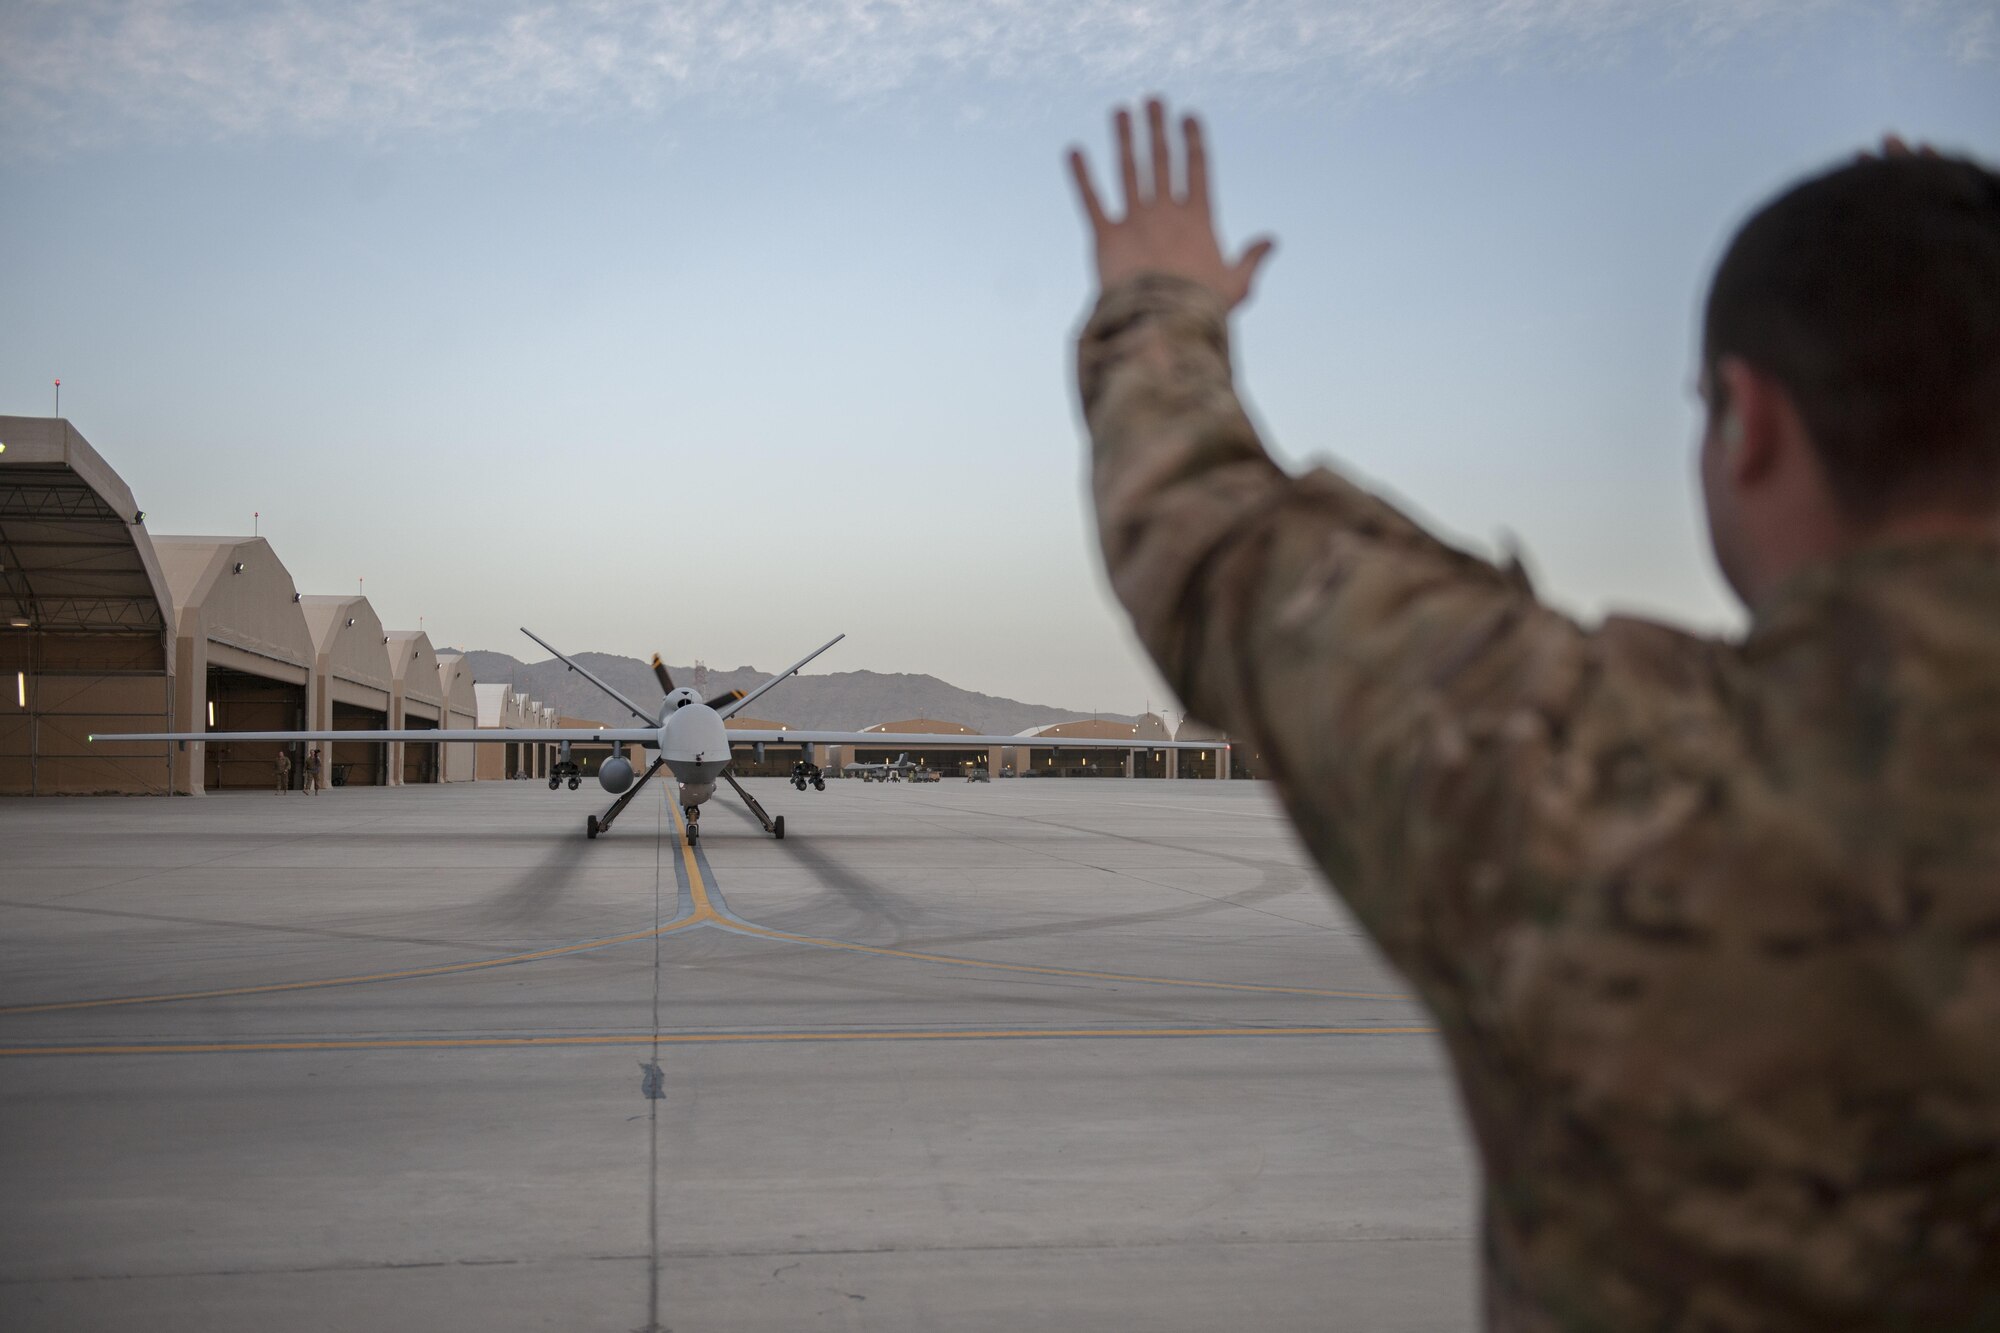 Senior Airman Christopher, 62nd Expeditionary Reconnaissance Squadron weapons load crew member, marshals an MQ-9 Reaper for end-of-runway checks at Kandahar Airfield, Afghanistan, Dec. 6, 2015. The Reaper is an armed, multi-mission, medium-altitude, long-endurance remotely piloted aircraft that is employed primarily as an intelligence-collection asset and secondarily against dynamic execution targets. (U.S. Air Force photo by Tech. Sgt. Robert Cloys/Released)